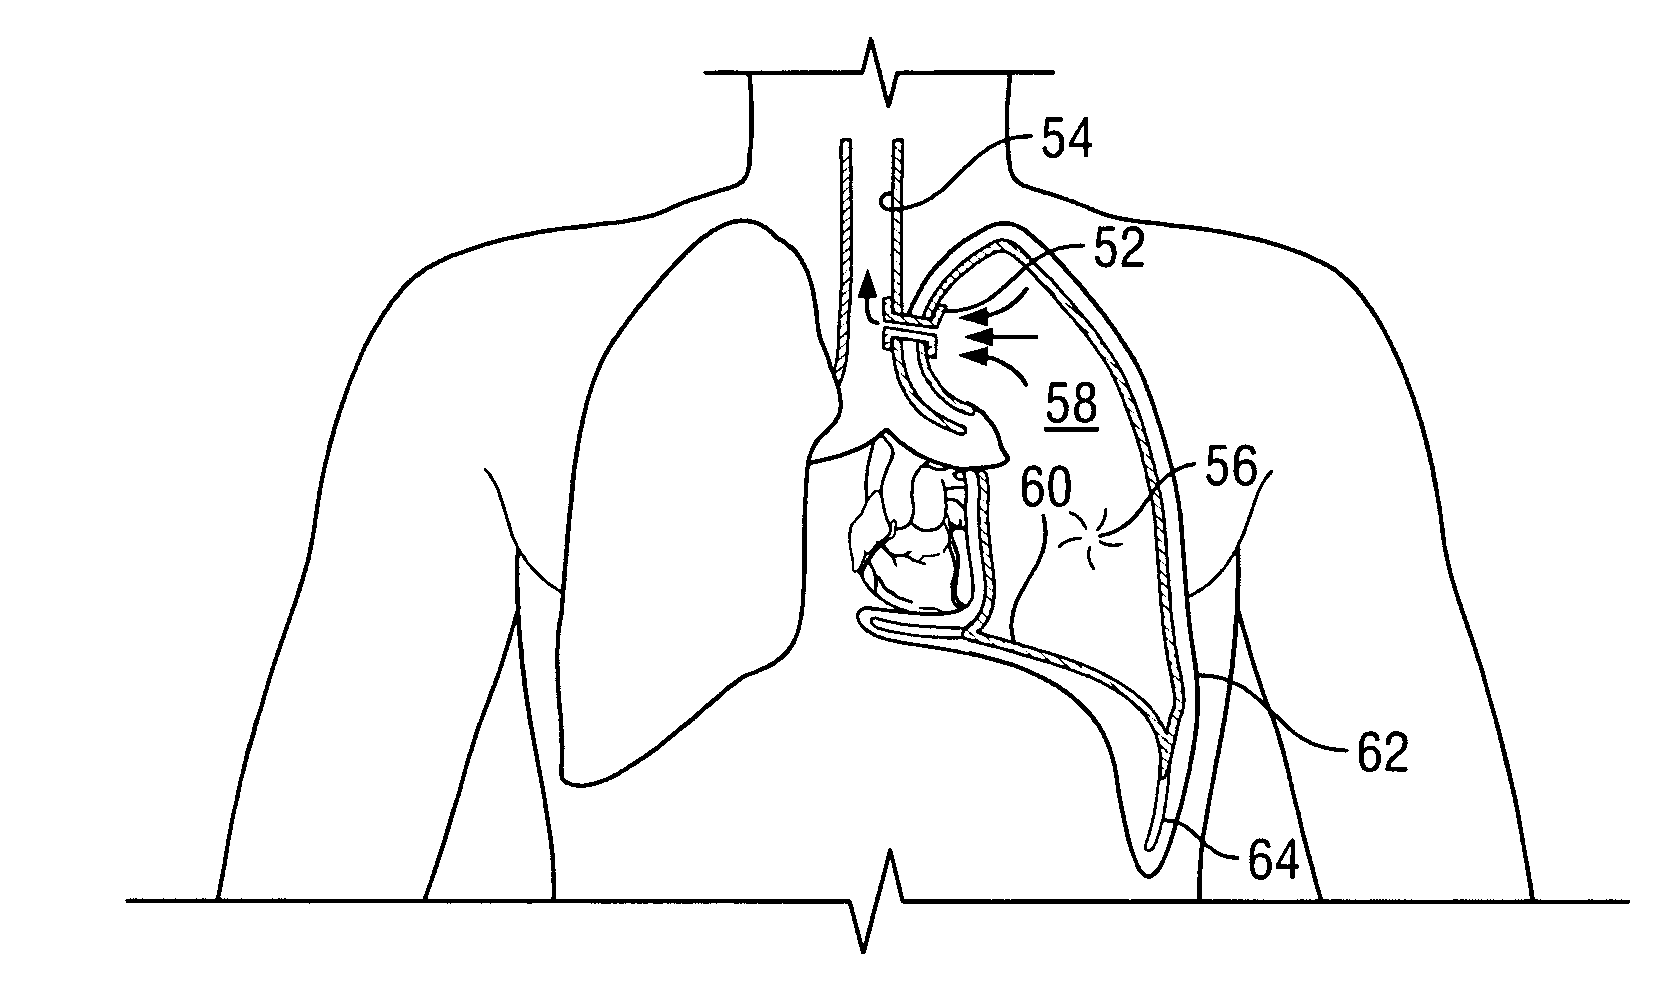 Extrapleural airway device and method